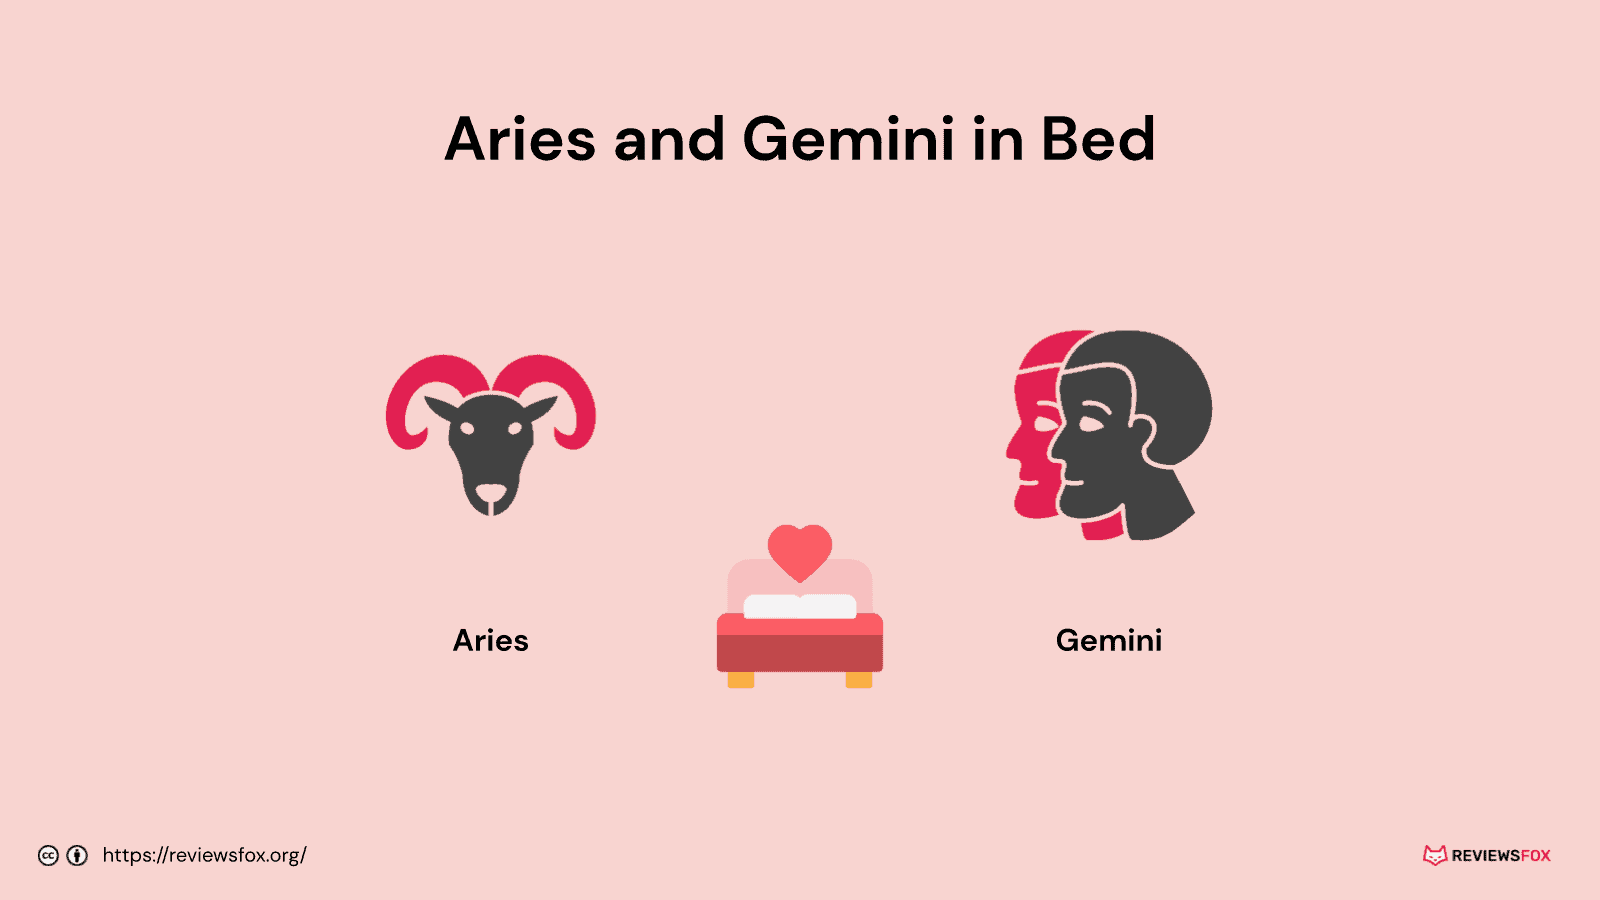 Are Aries and Gemini Good in Bed?